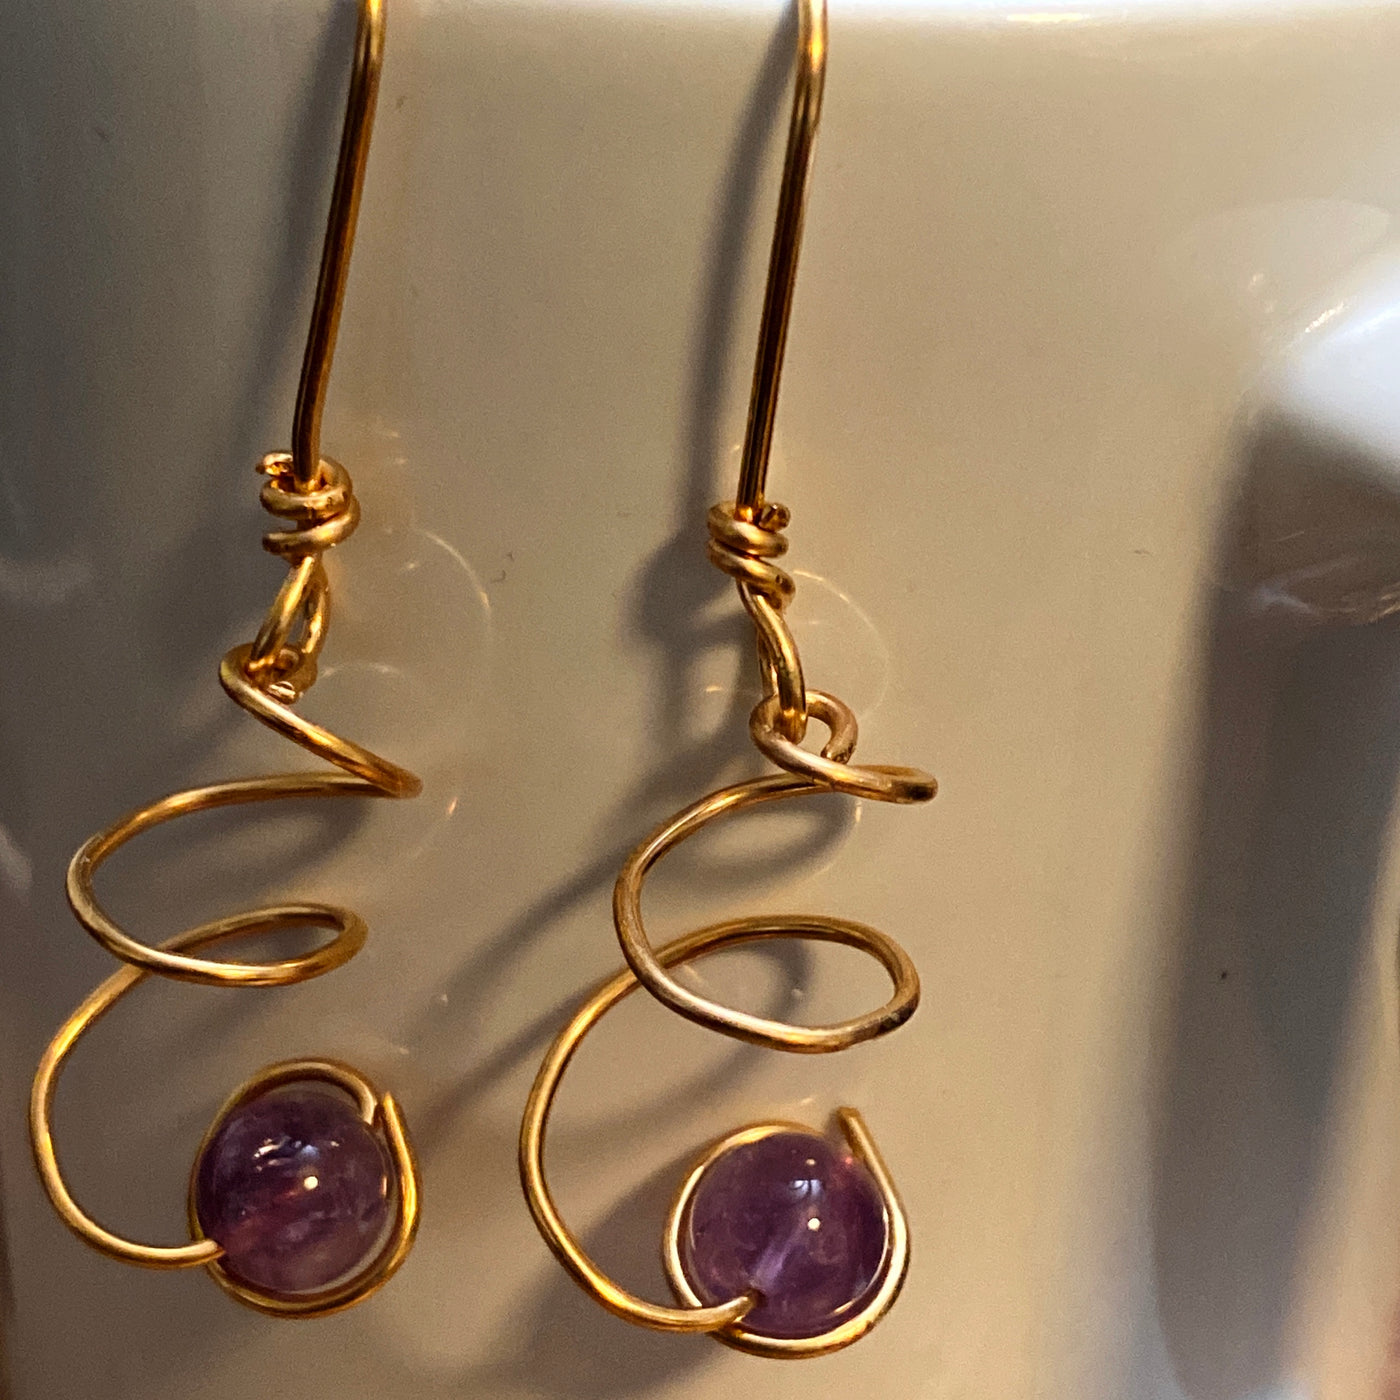 Amethyst and brass earrings. Lines collection.